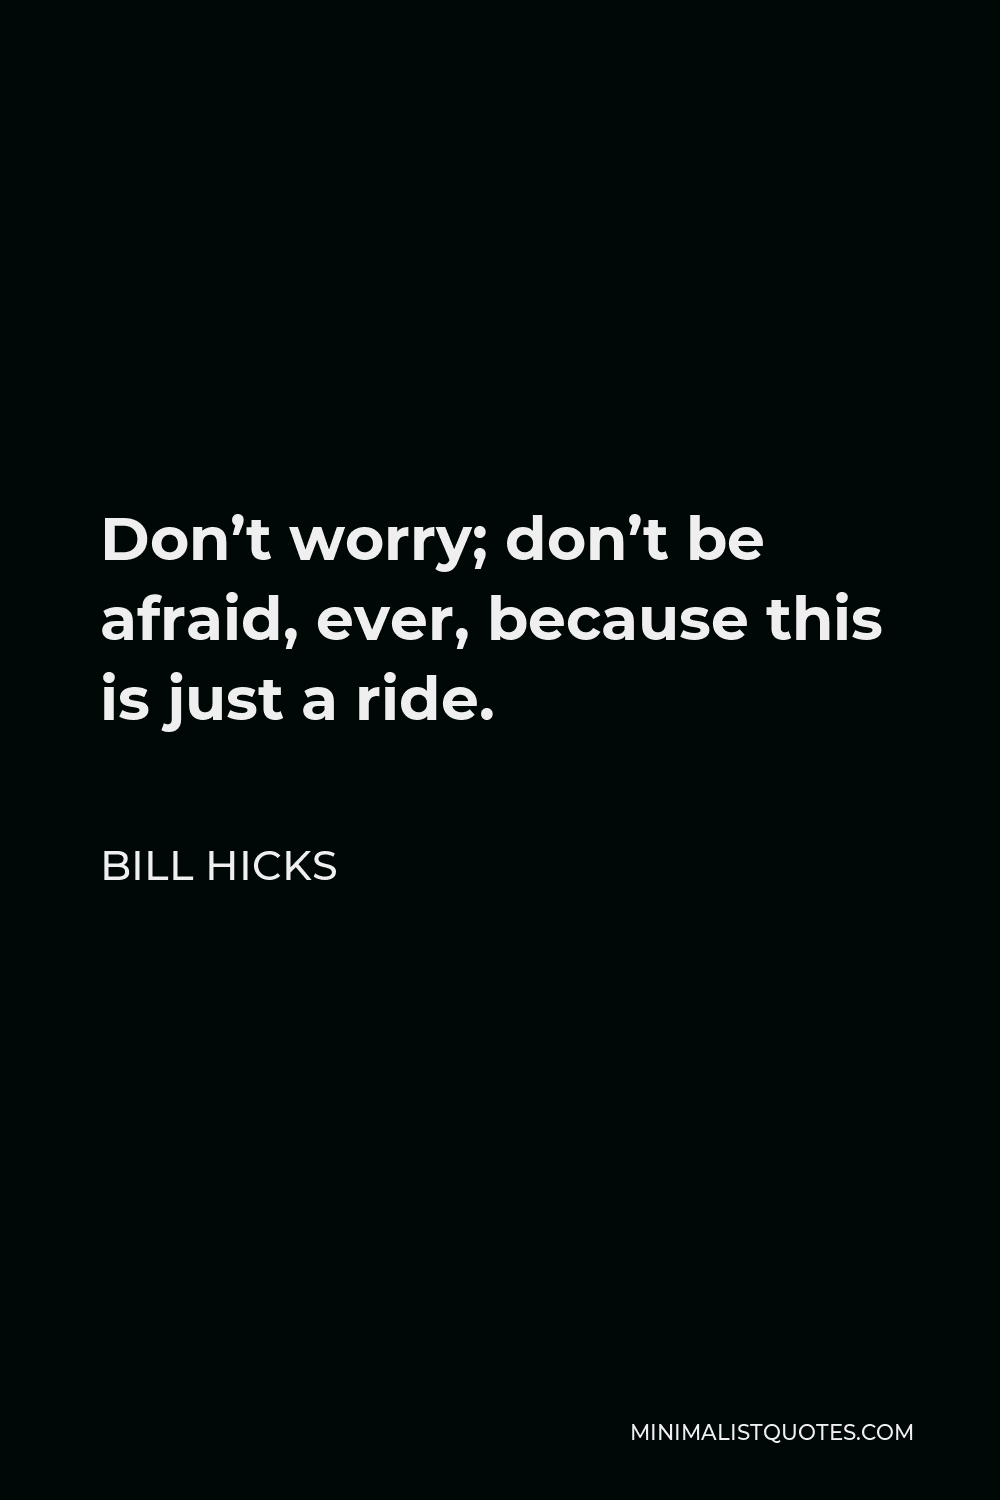 Bill Hicks Quote - Don’t worry; don’t be afraid, ever, because this is just a ride.